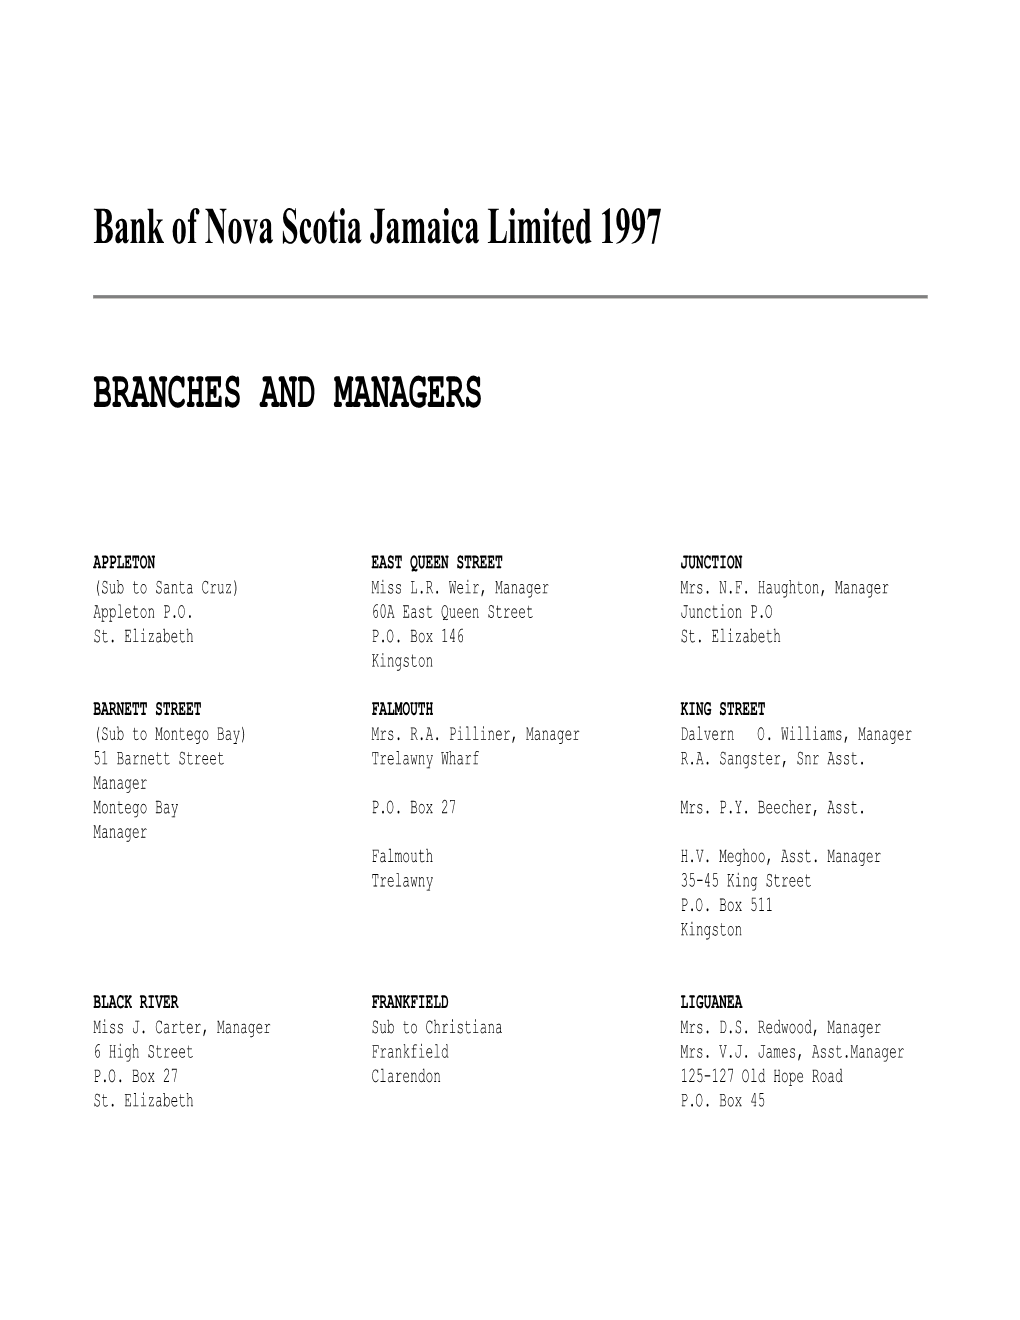 Bank of Nova Scotia Jamaica Limited 1997 BRANCHES and MANAGERS